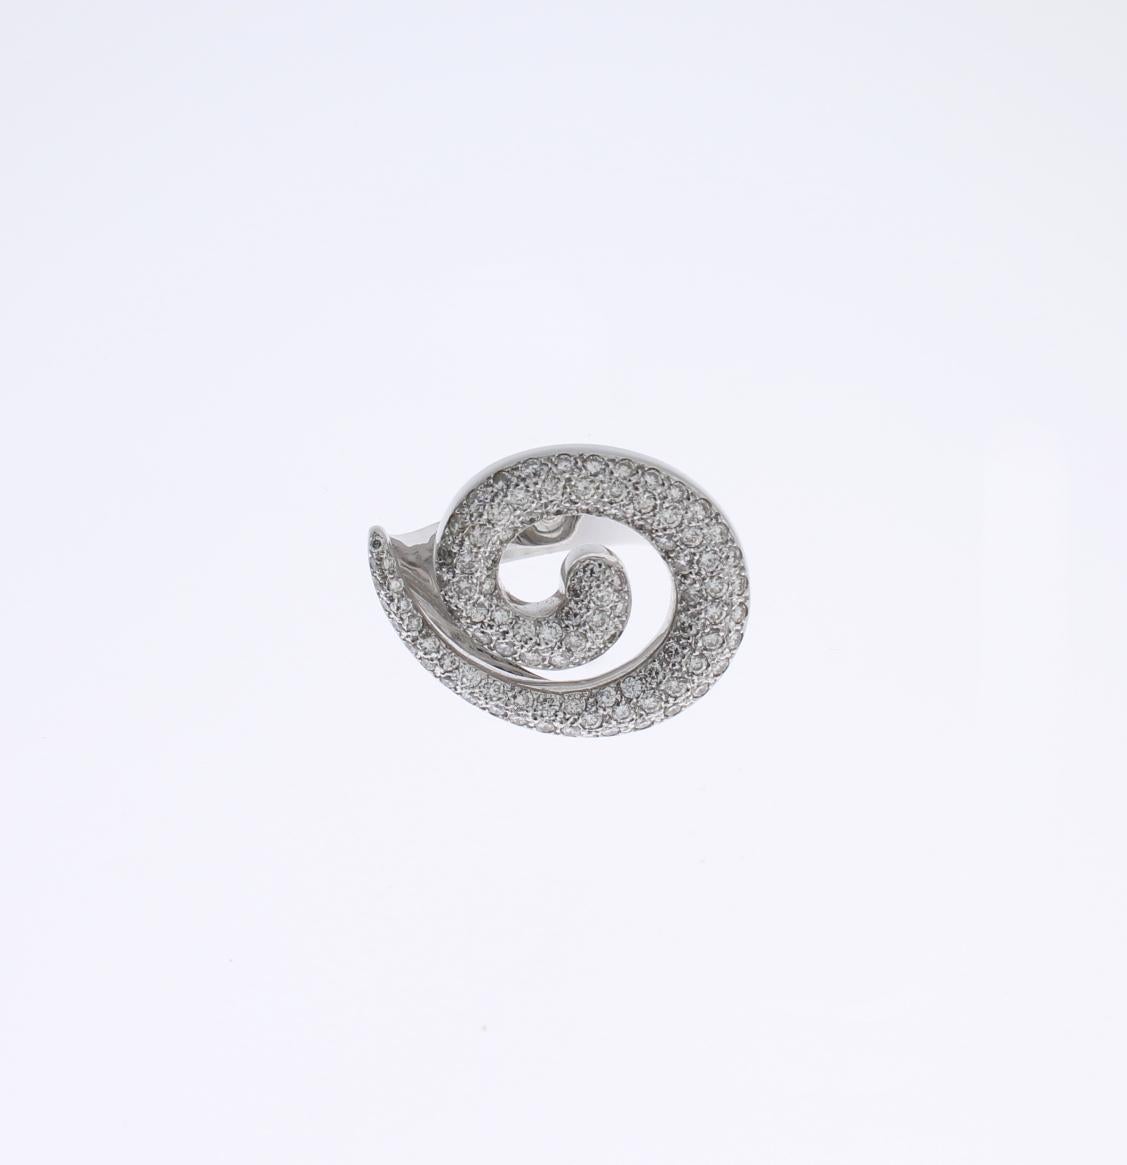 Spiral design, 2000's. Pavé set with brilliant-cut diamonds weighing total 1,87 carats. Mounted in 18 K white gold.
Marked with the purity 750, stamped CIM 2005. Total weight: 20.21 grams. 
Ring size: 53 ( US 6.4 ). Resizable.
